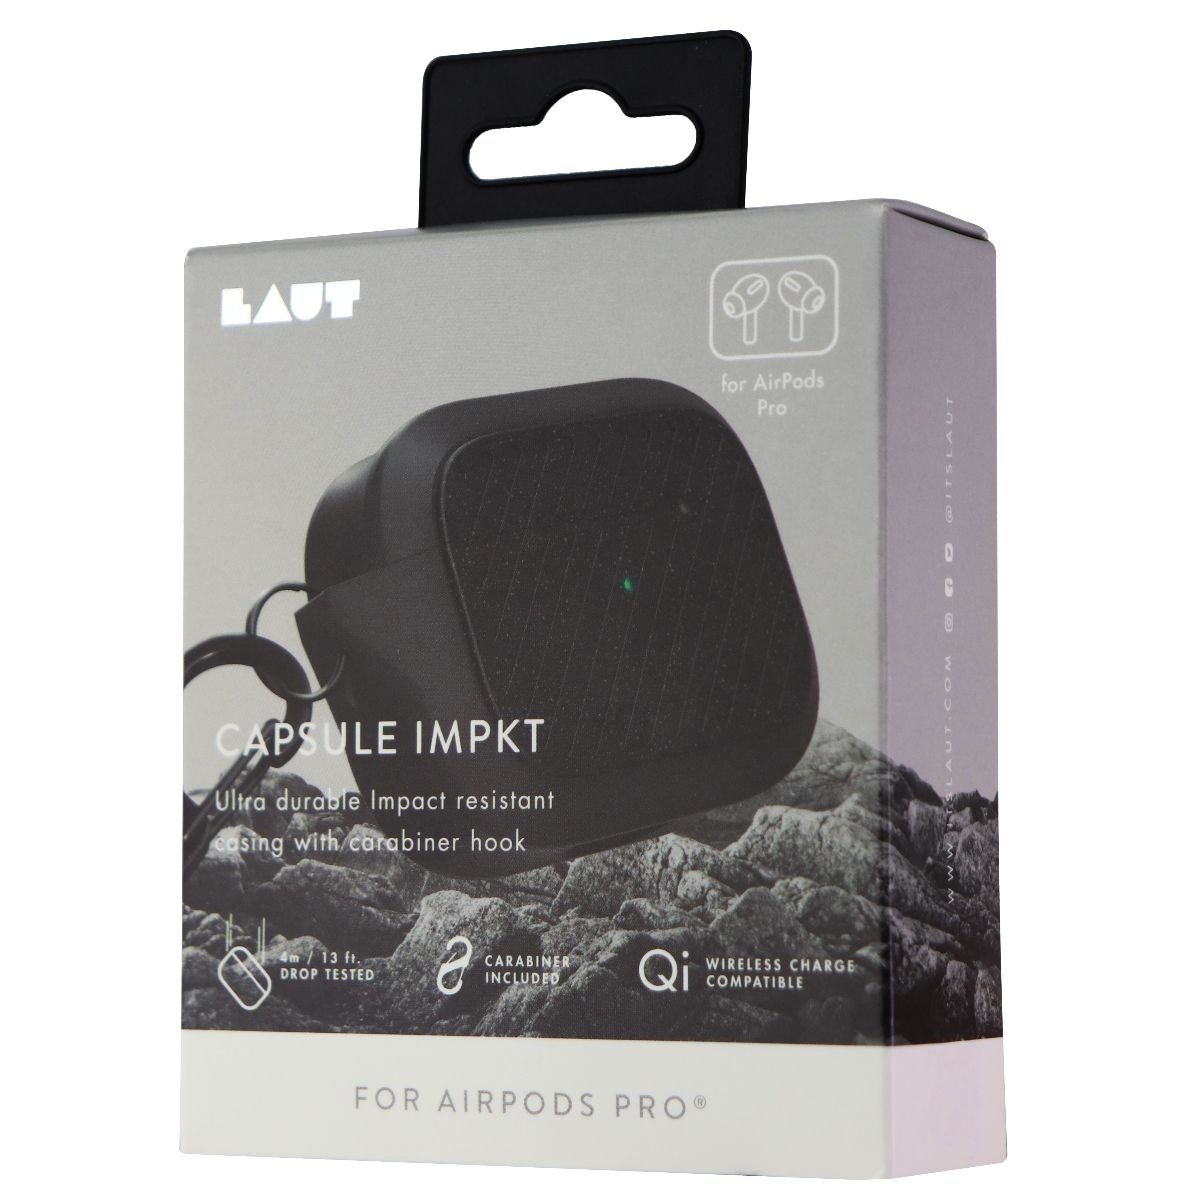 Laut Capsule Impkt Ultra Durable Case For Apple AirPods Pro - Slate